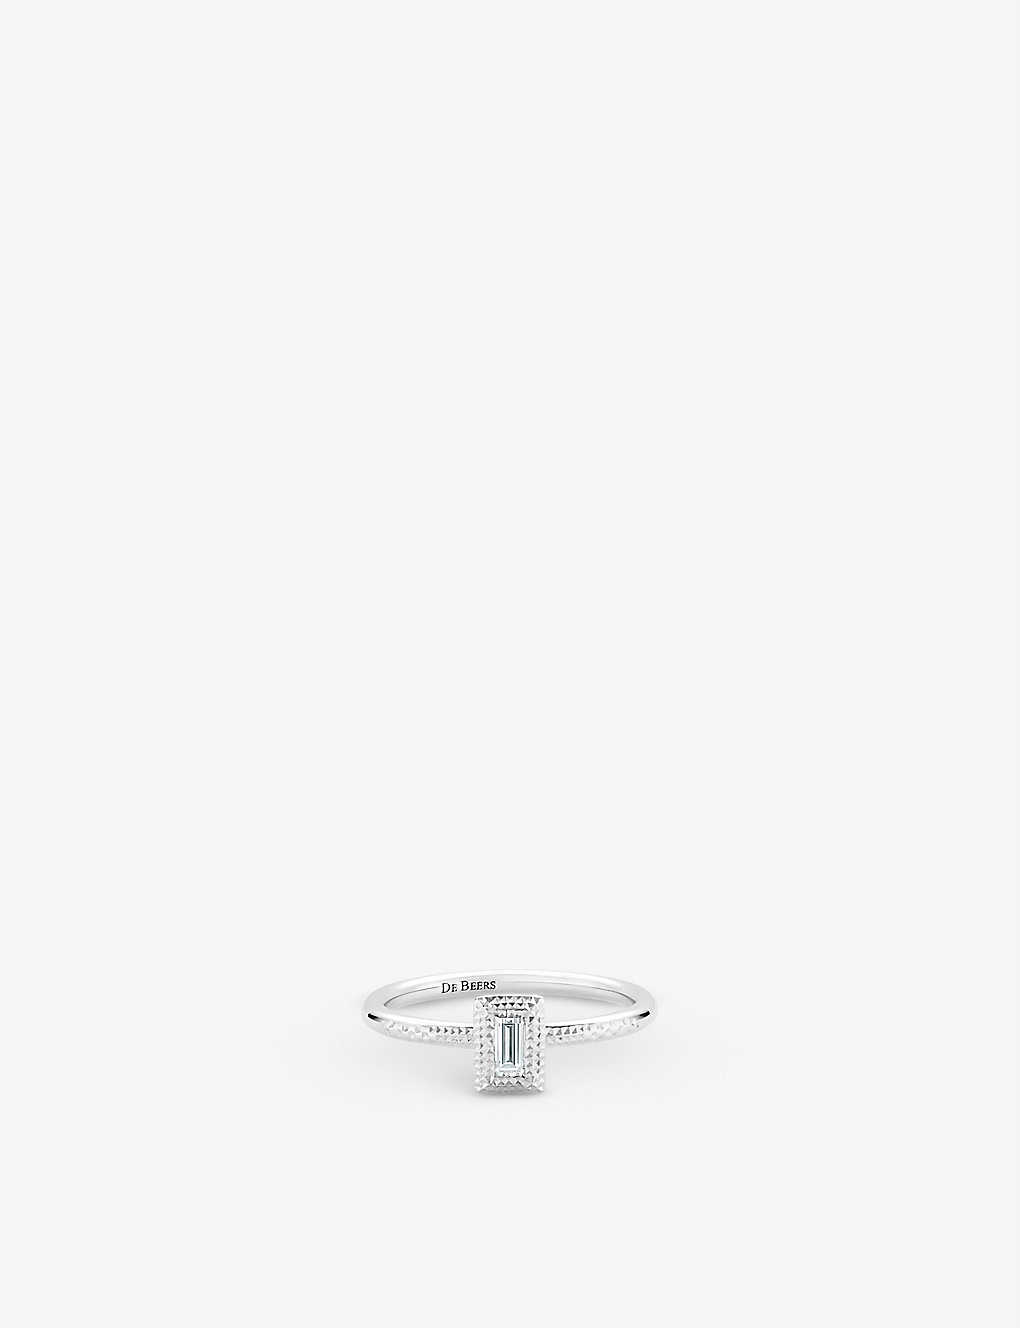 De Beers Talisman Rhodium-plated 18ct White-gold And 0.10ct Baguette-cut Diamond Ring In 18k White Gold